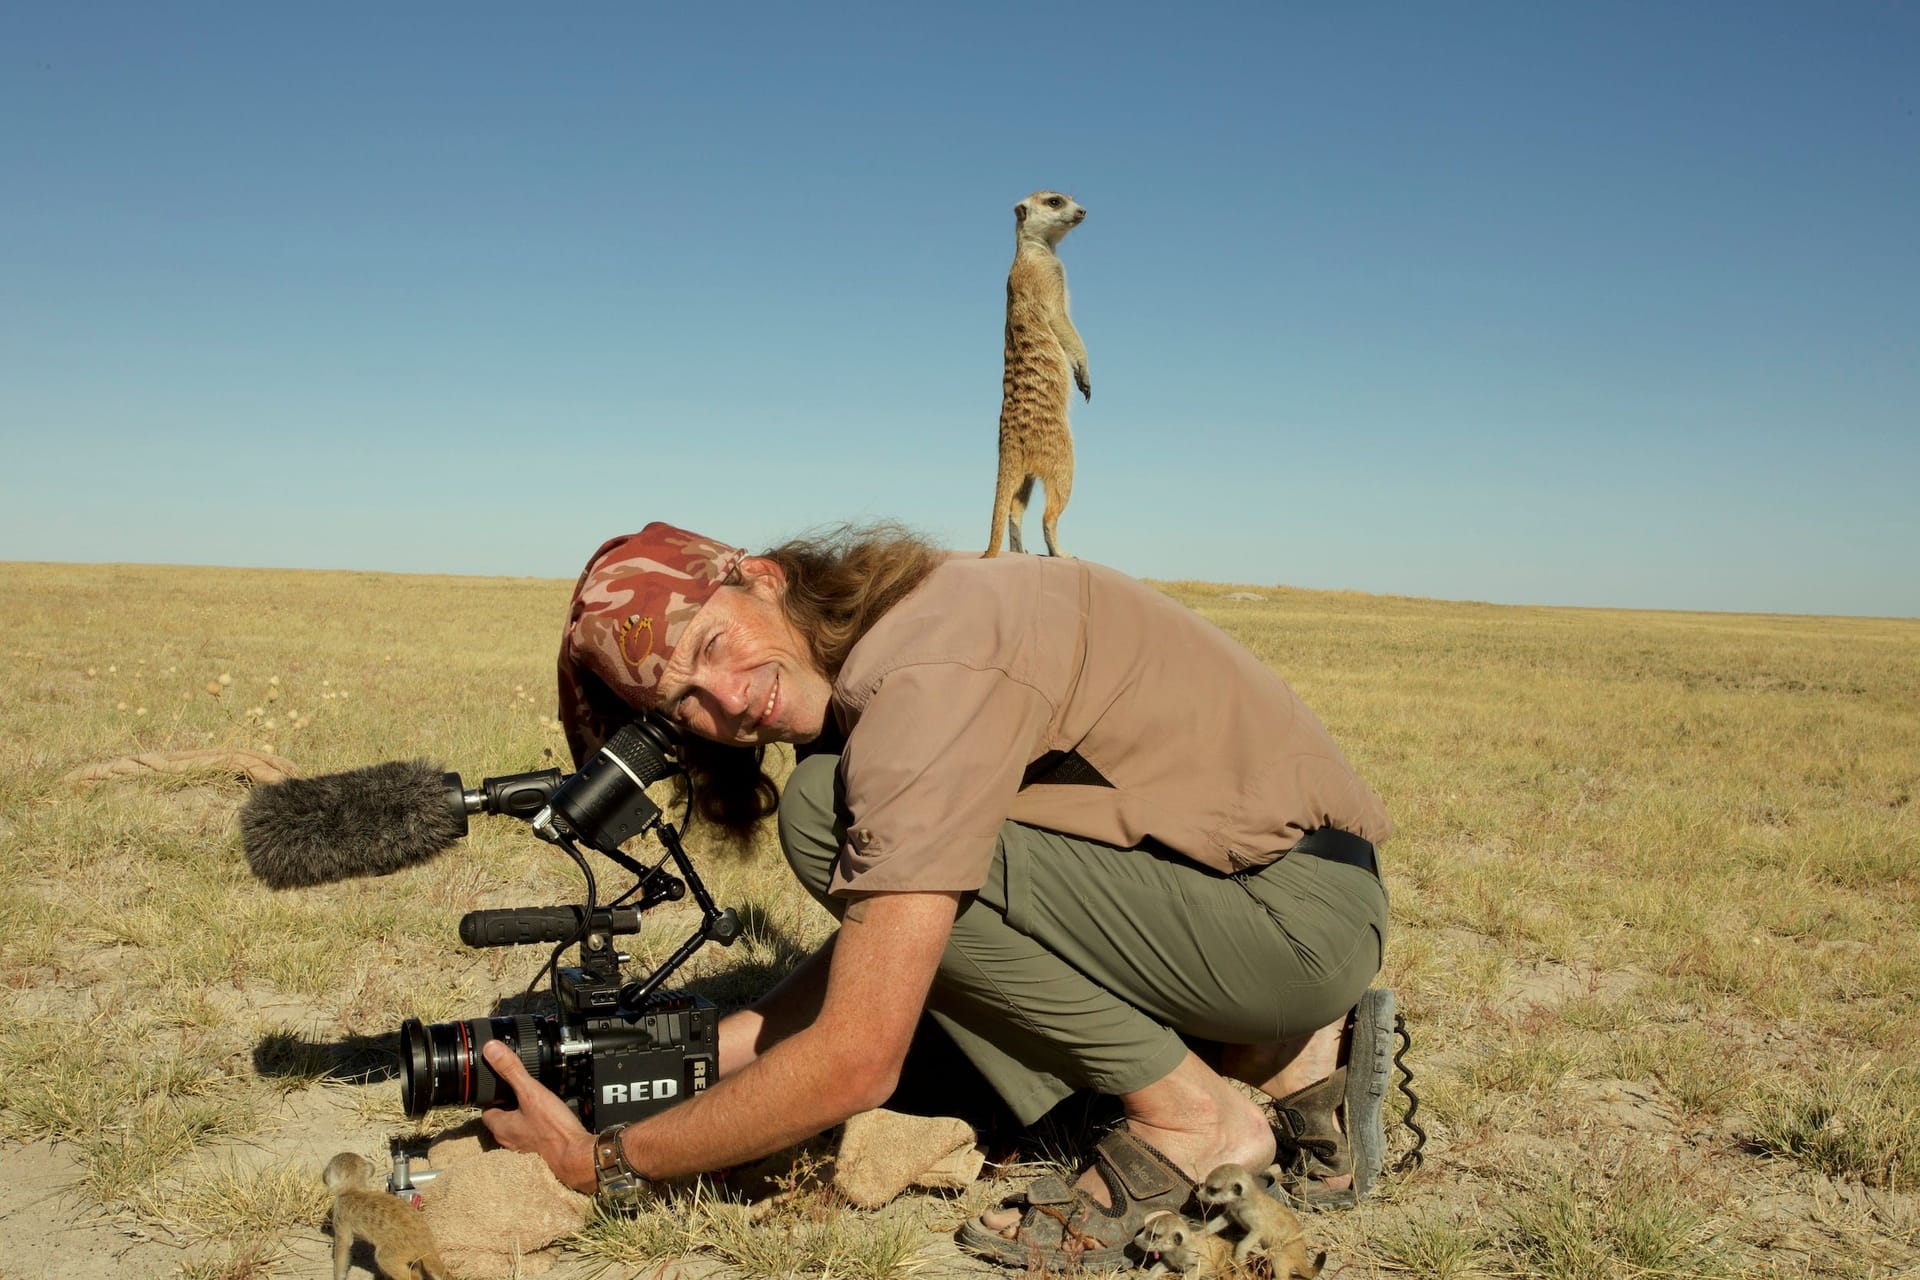 The filmmaker in his element: In the middle of the wilderness there is only him, the animals and his equipment.